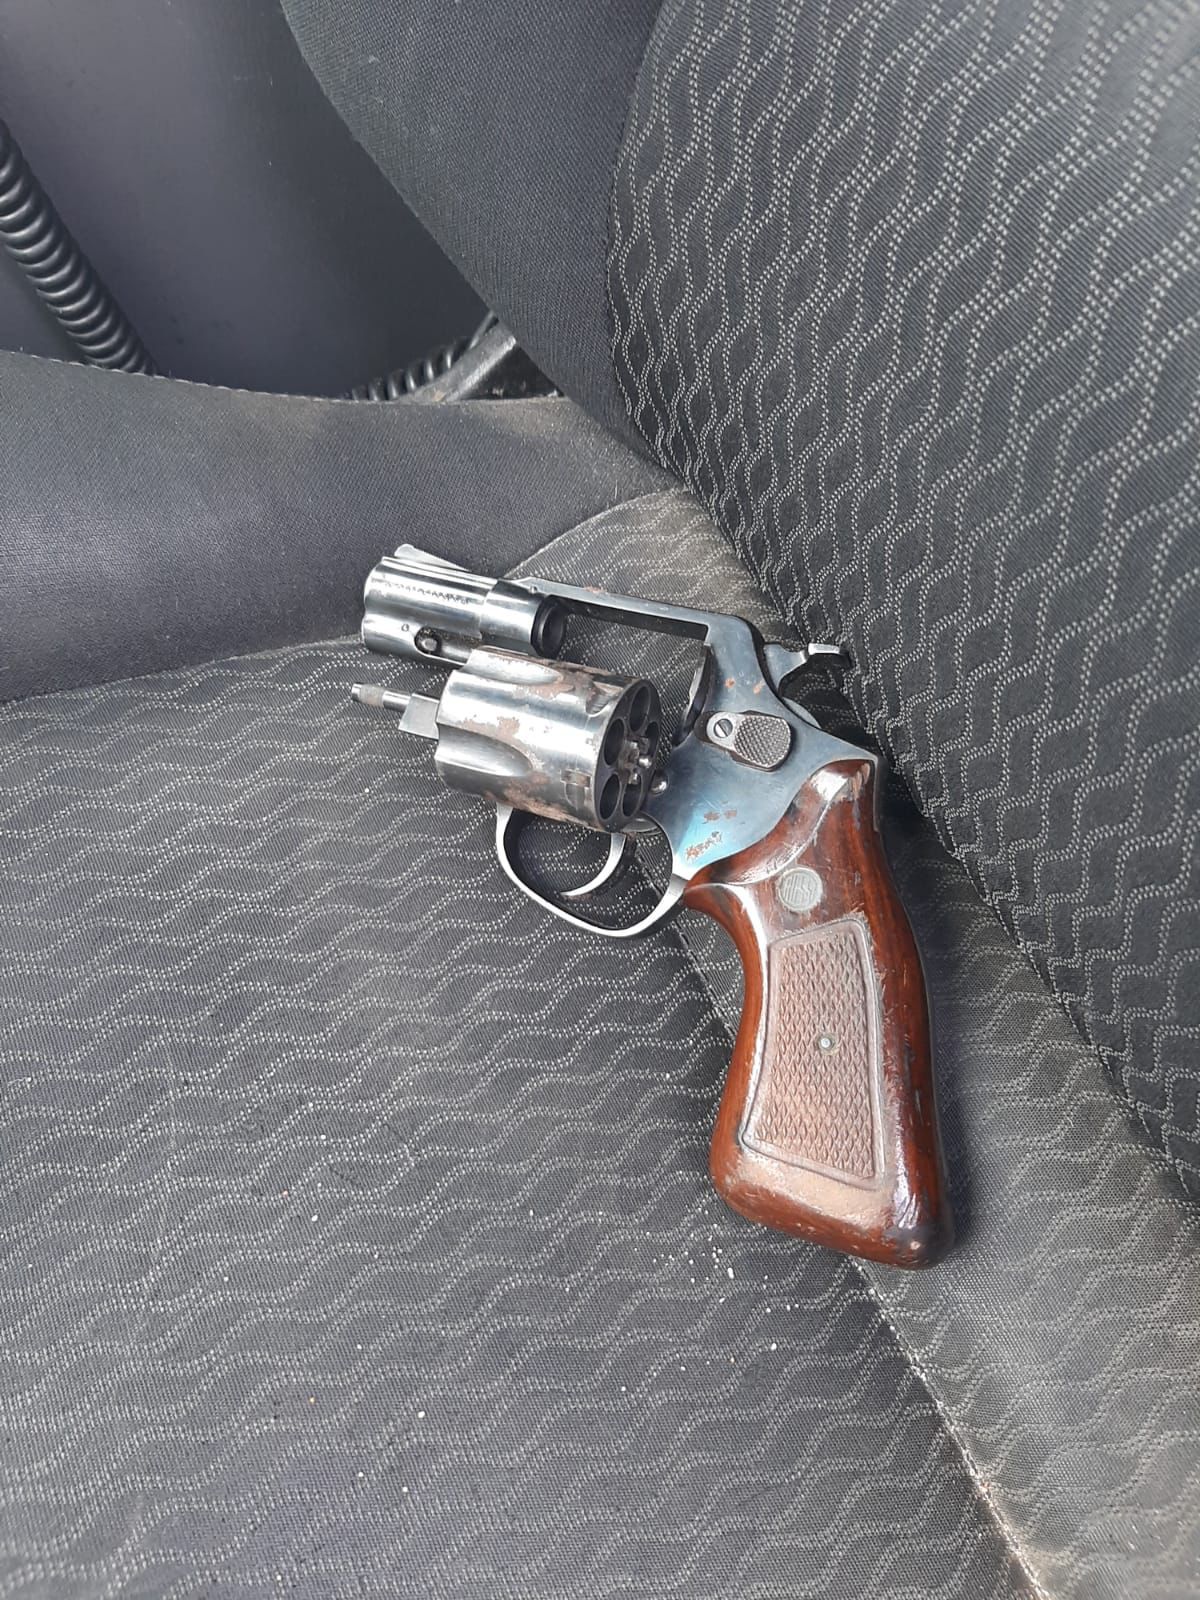 59-year-old man was arrested for being in possession of a .38 special revolver and ammunition illegally - Western Cape